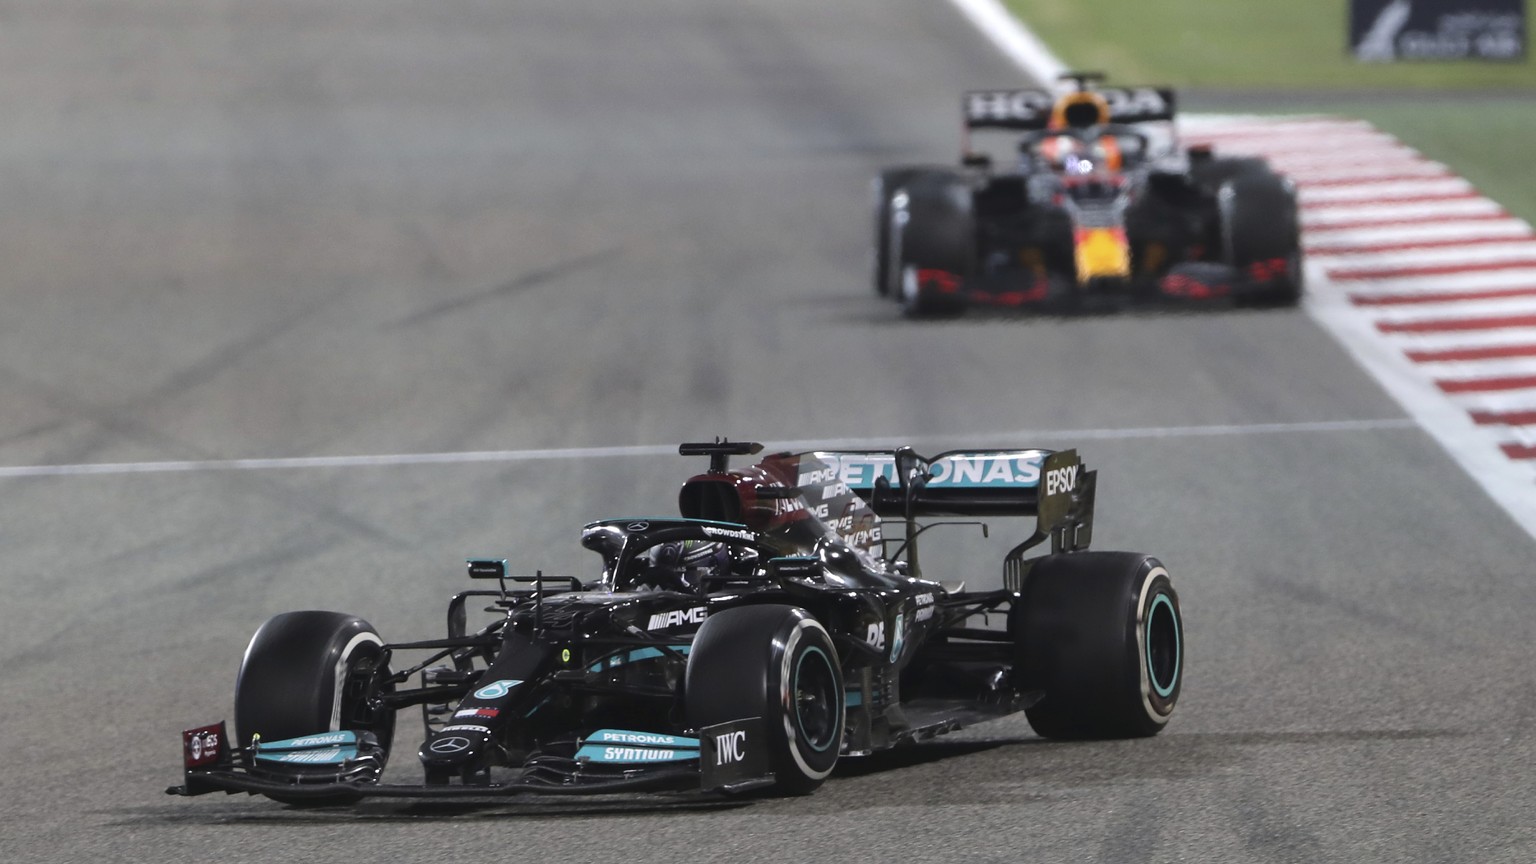 Mercedes driver Lewis Hamilton of Britain steers his car followed by Red Bull driver Max Verstappen of the Netherlands during the Bahrain Formula One Grand Prix at the Bahrain International Circuit in ...